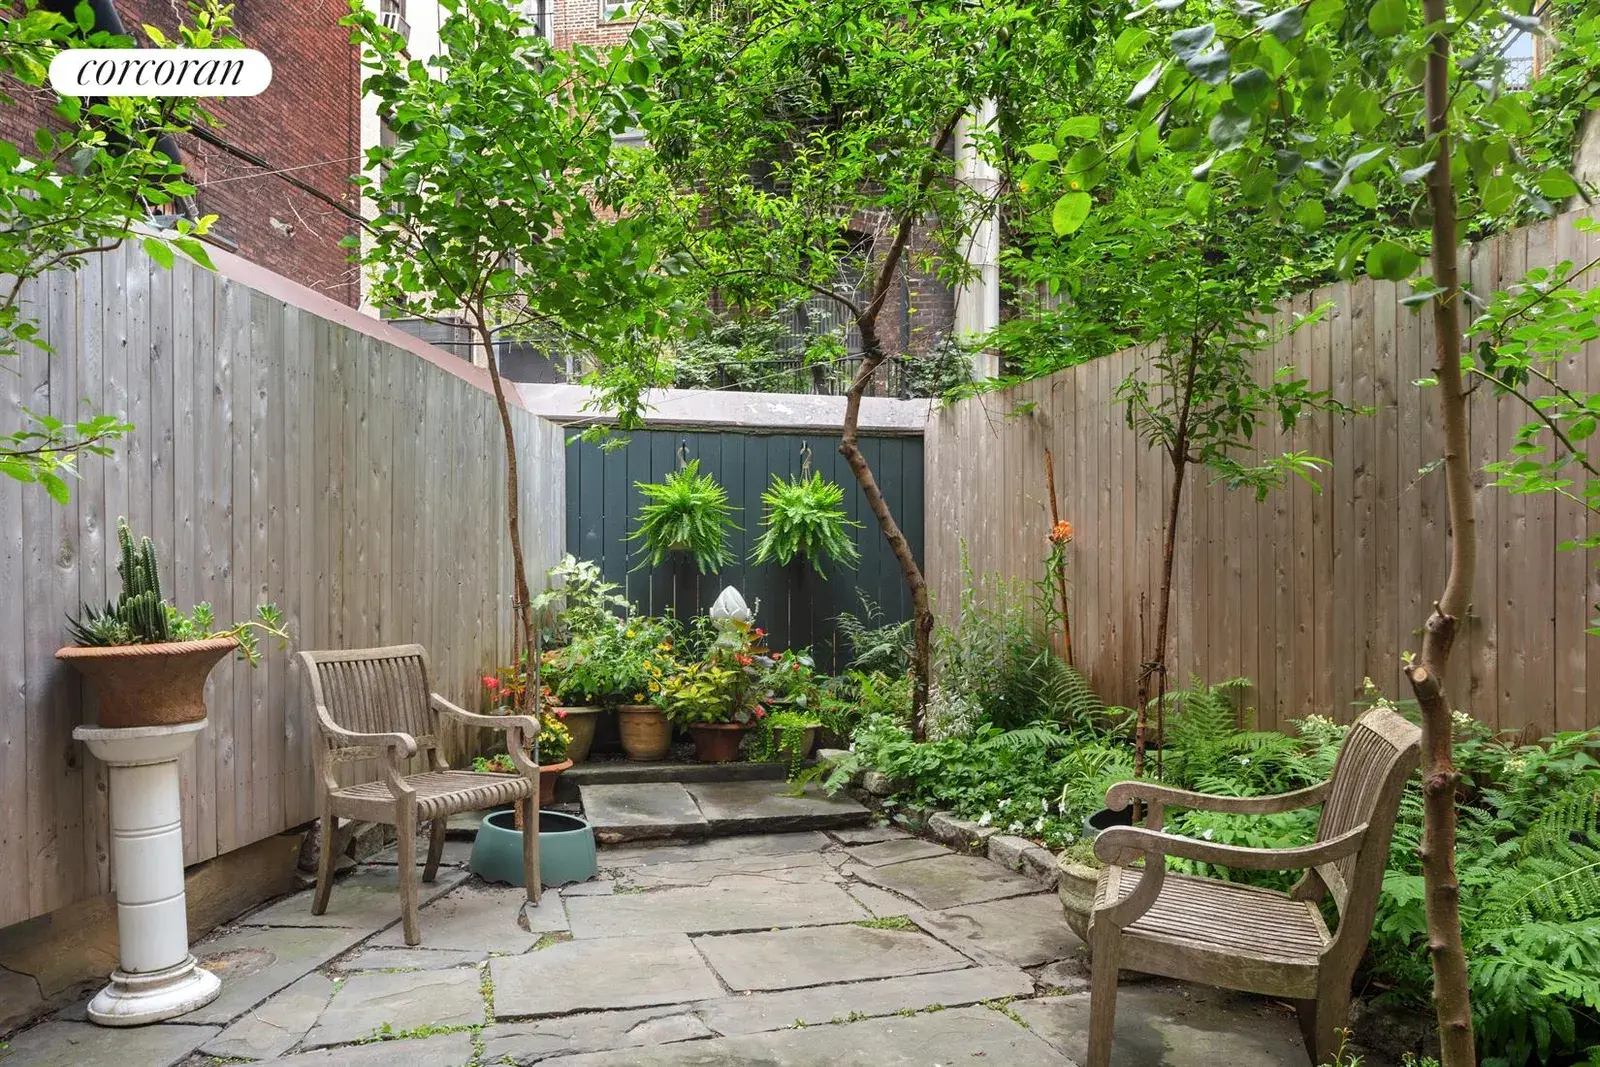 Manhattan’s Oldest Home Hits The Market For The First Time In 227 Years